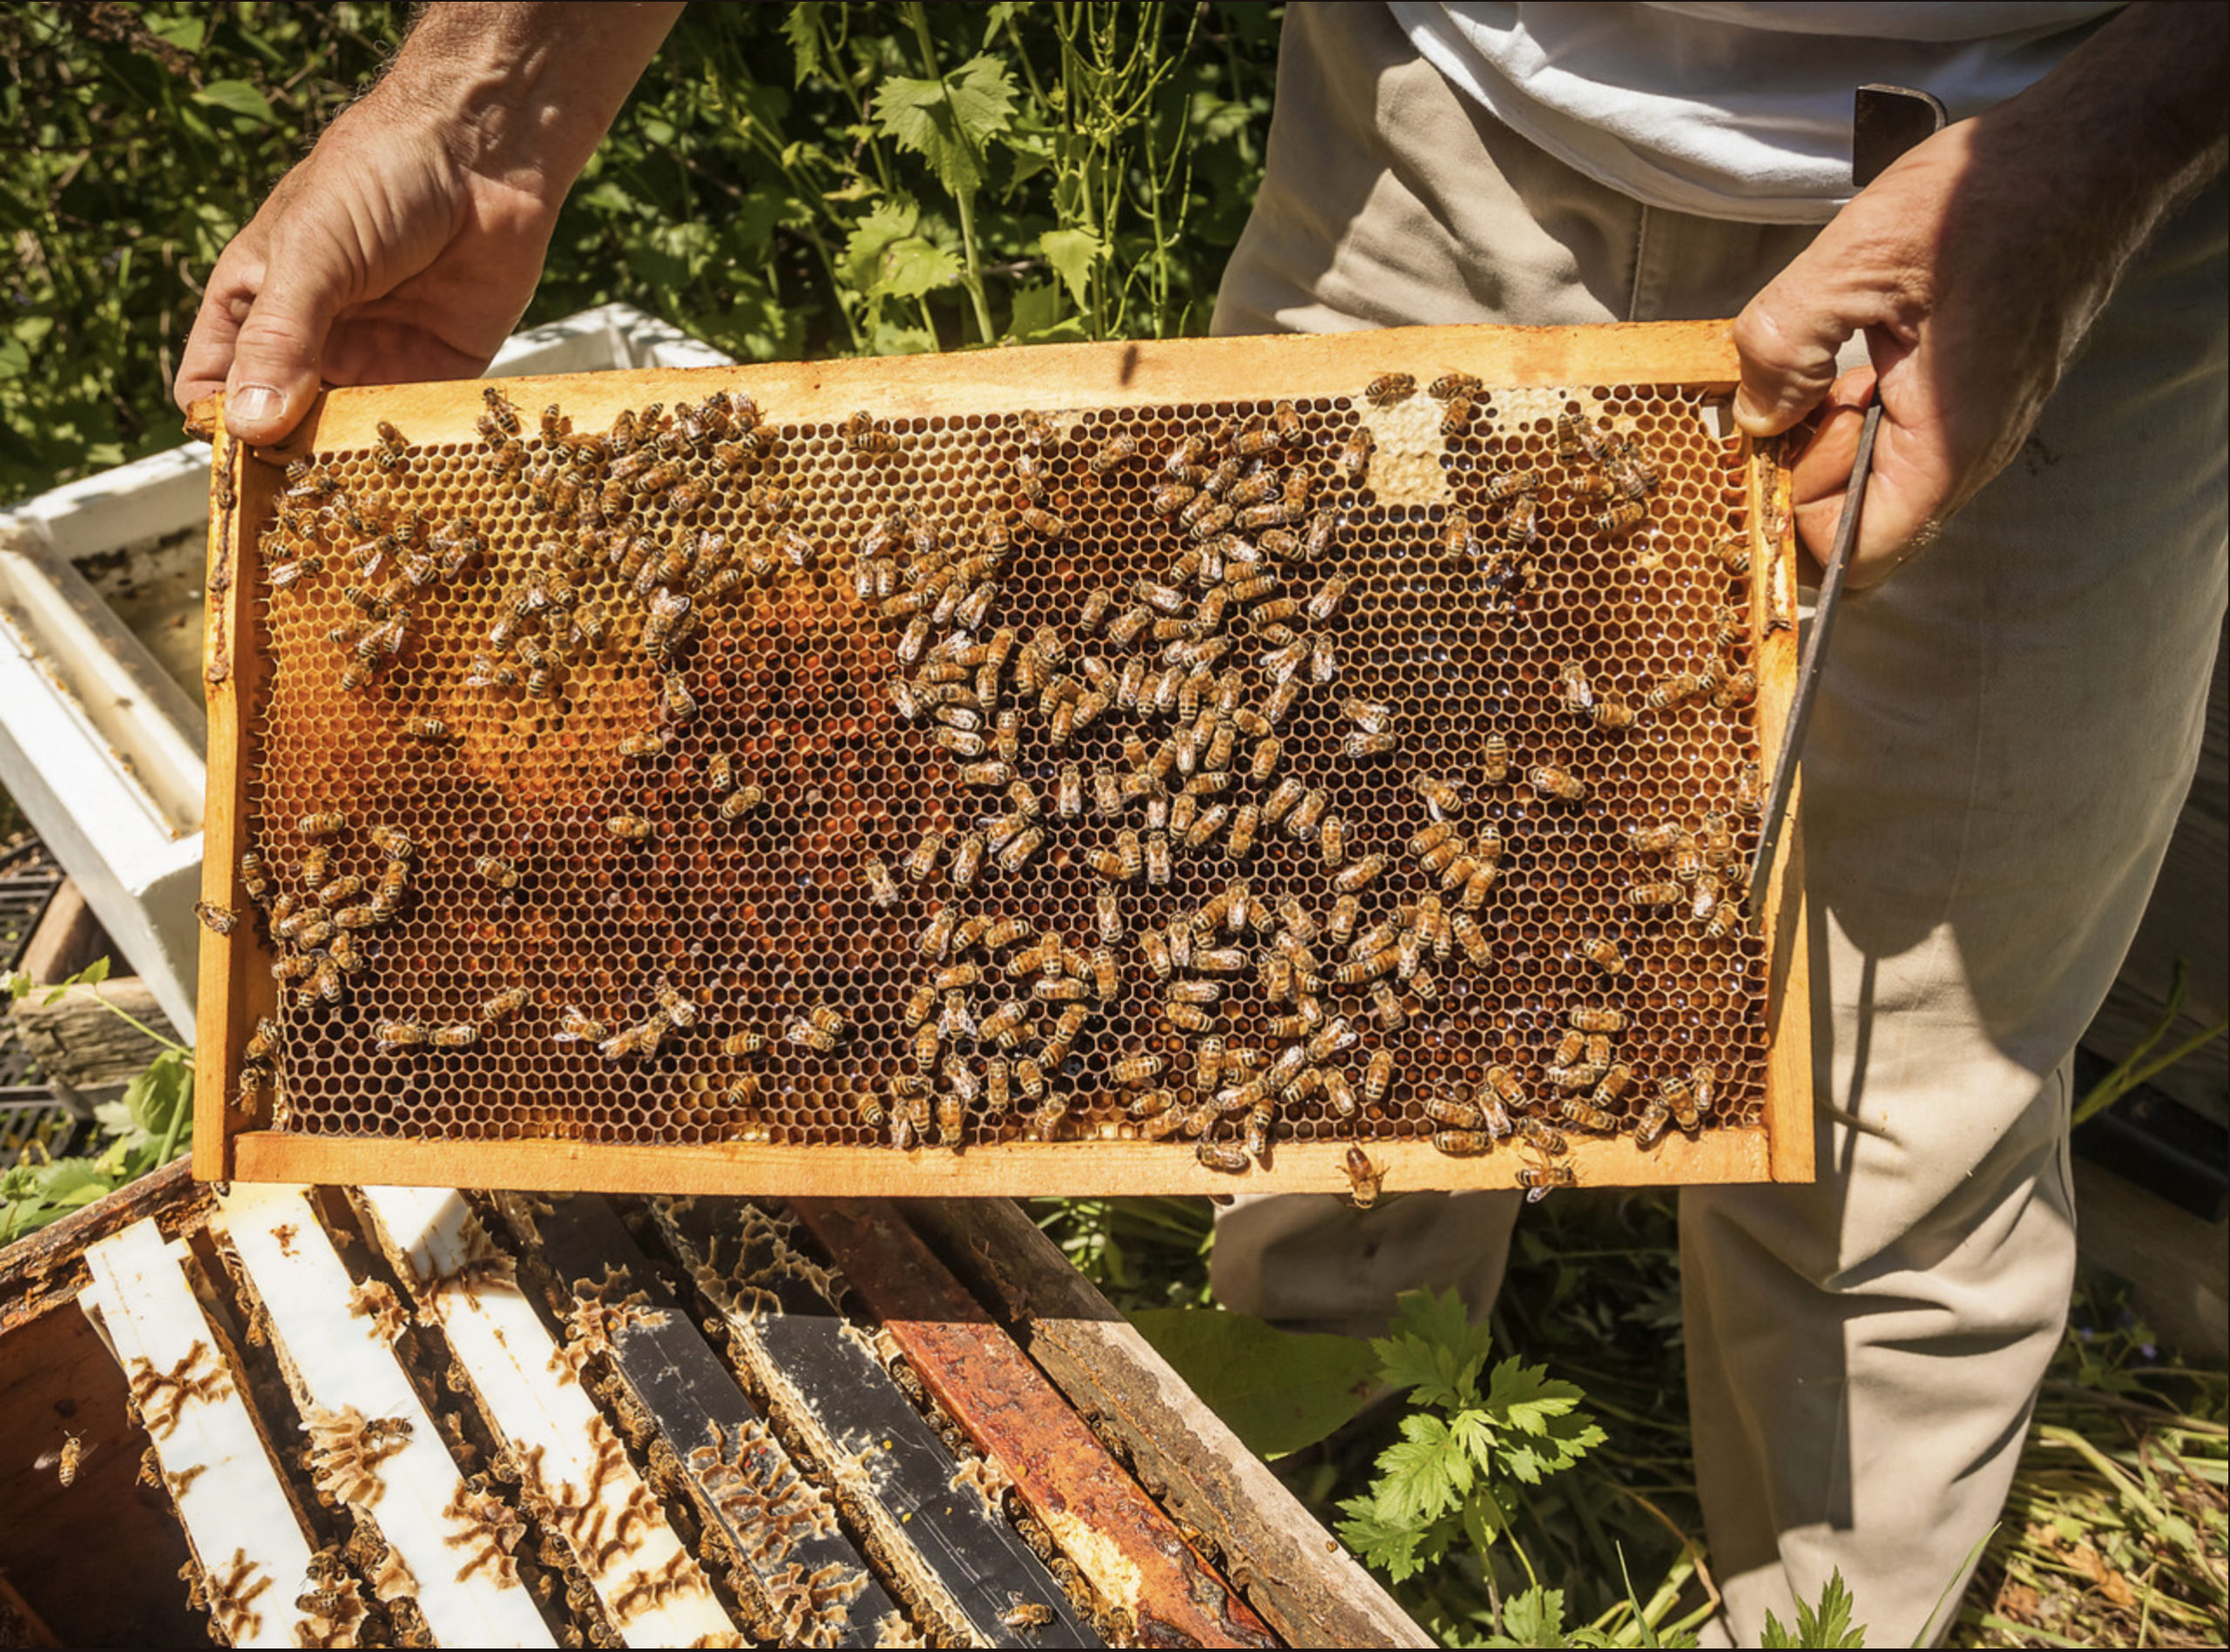 A rack of bees in a newly populated hive. IAN VORSTER